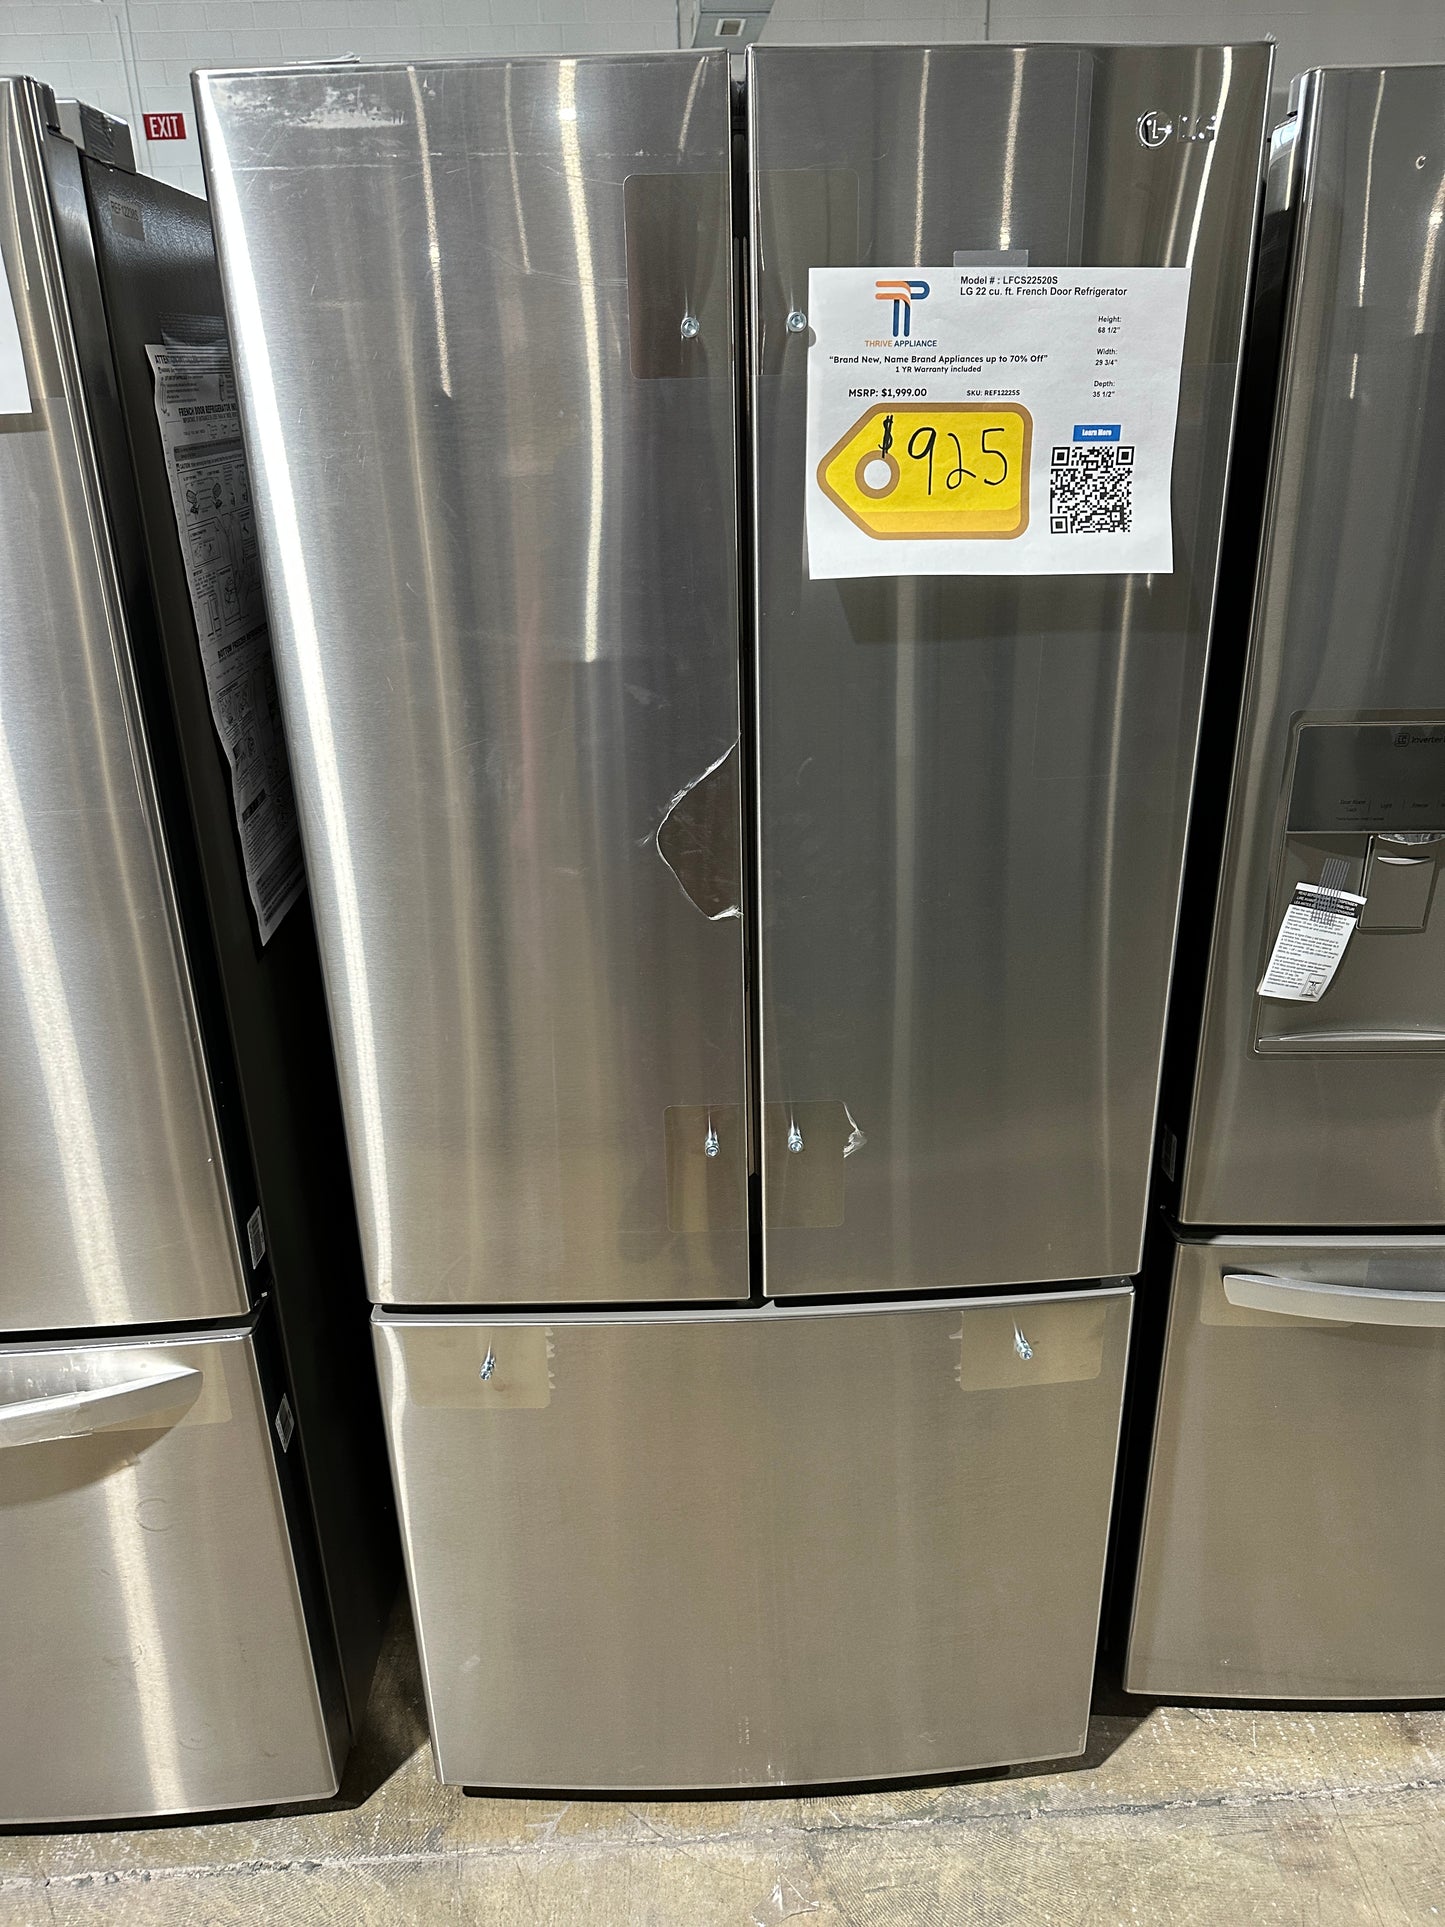 NEW LG FRENCH DOOR REFRIGERATOR with SMART COOLING MODEL:LFCS22520S  REF12225S